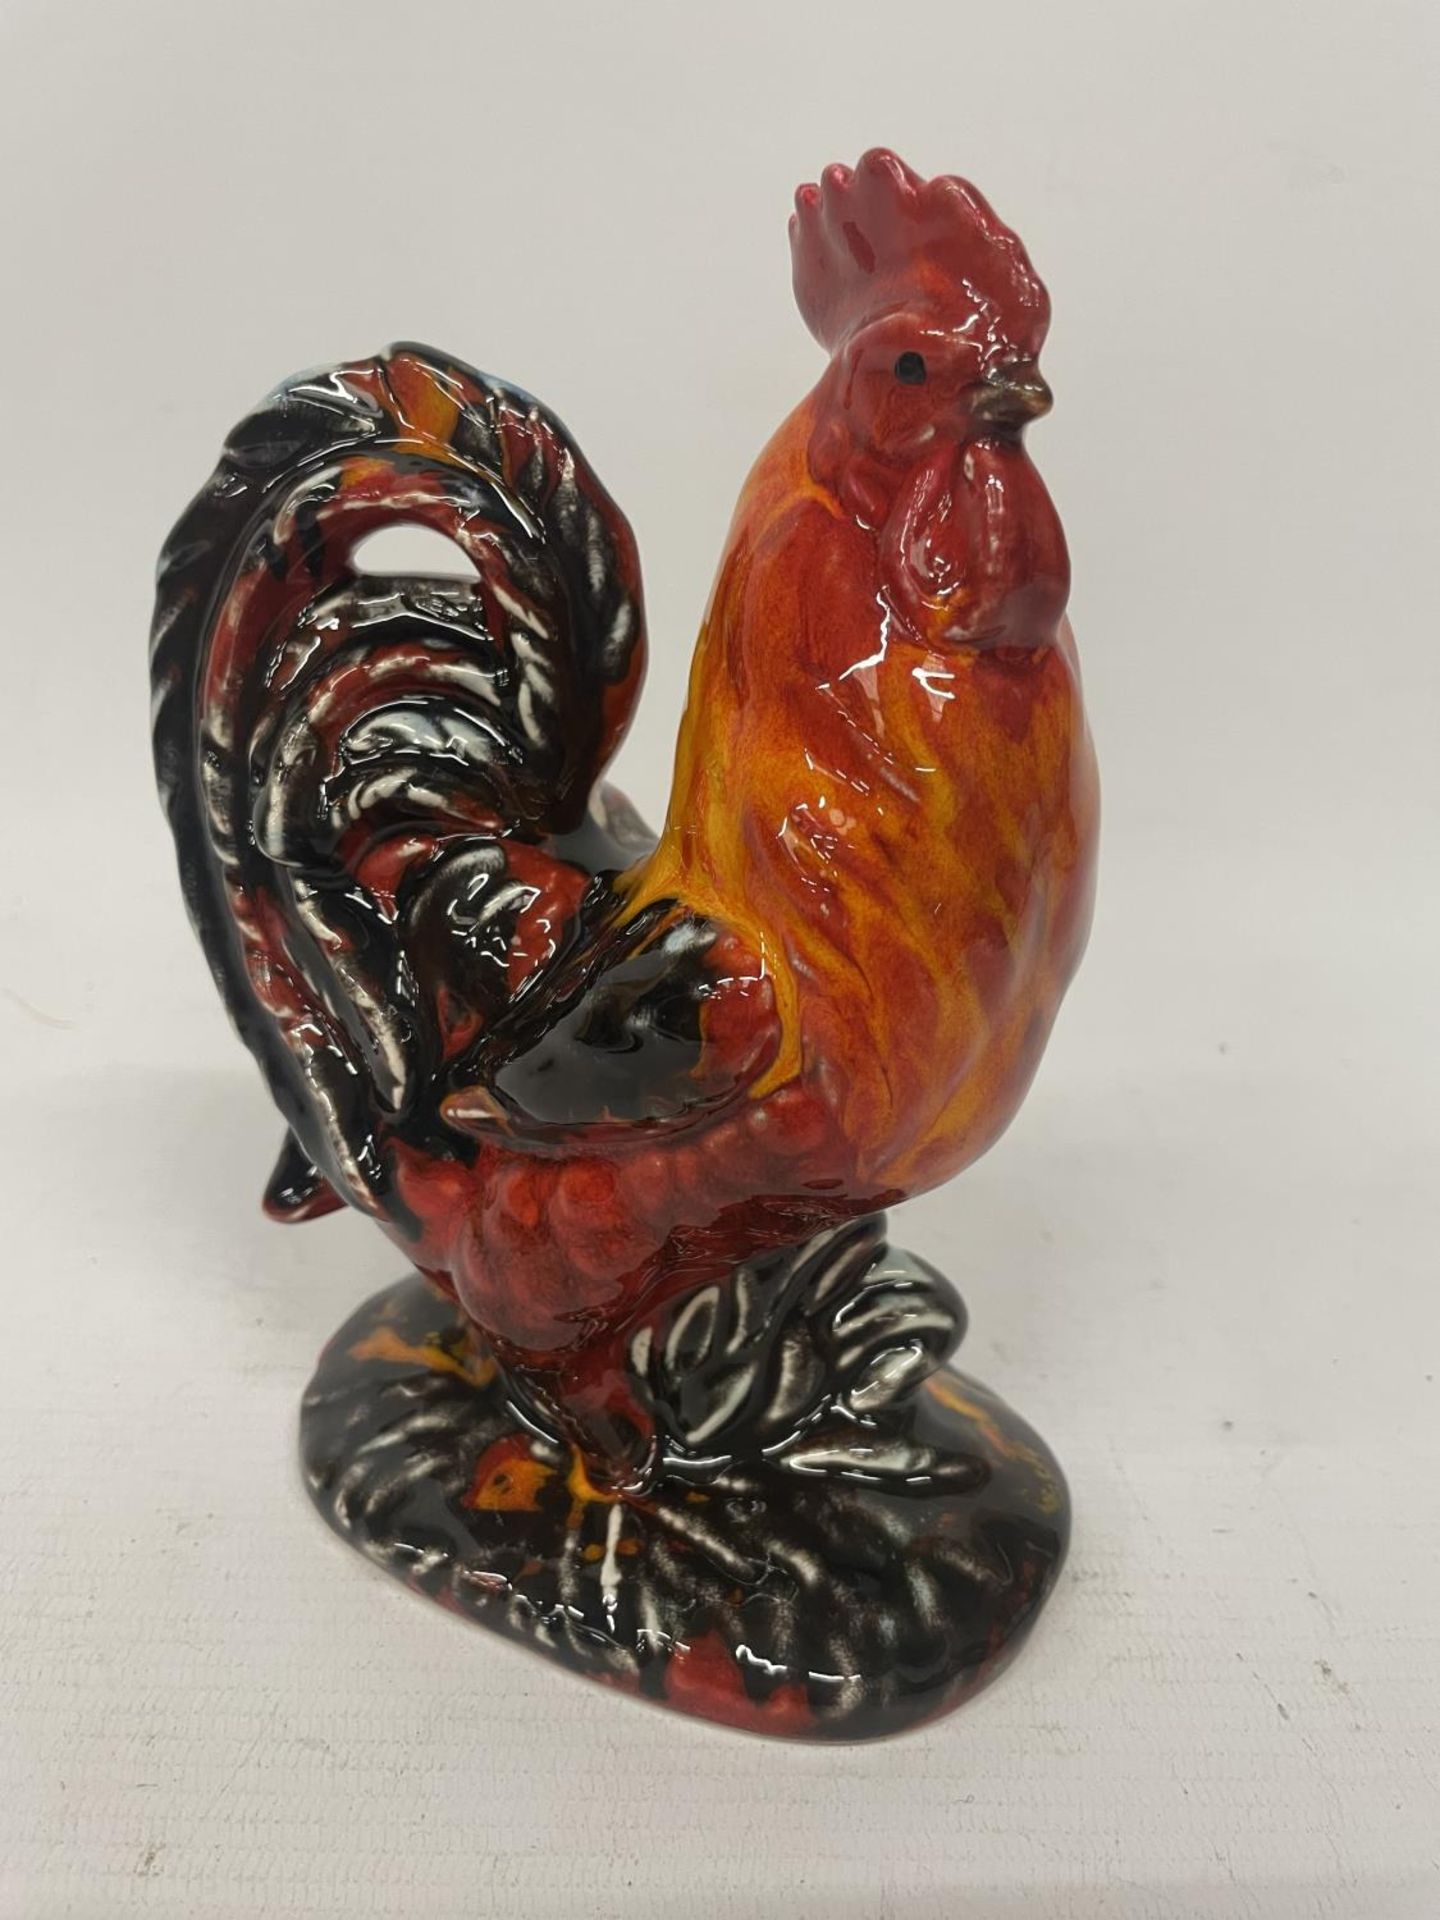 AN ANITA HARRIS COCKEREL FIGURE HAND PAINTED AND SIGNED IN GOLD